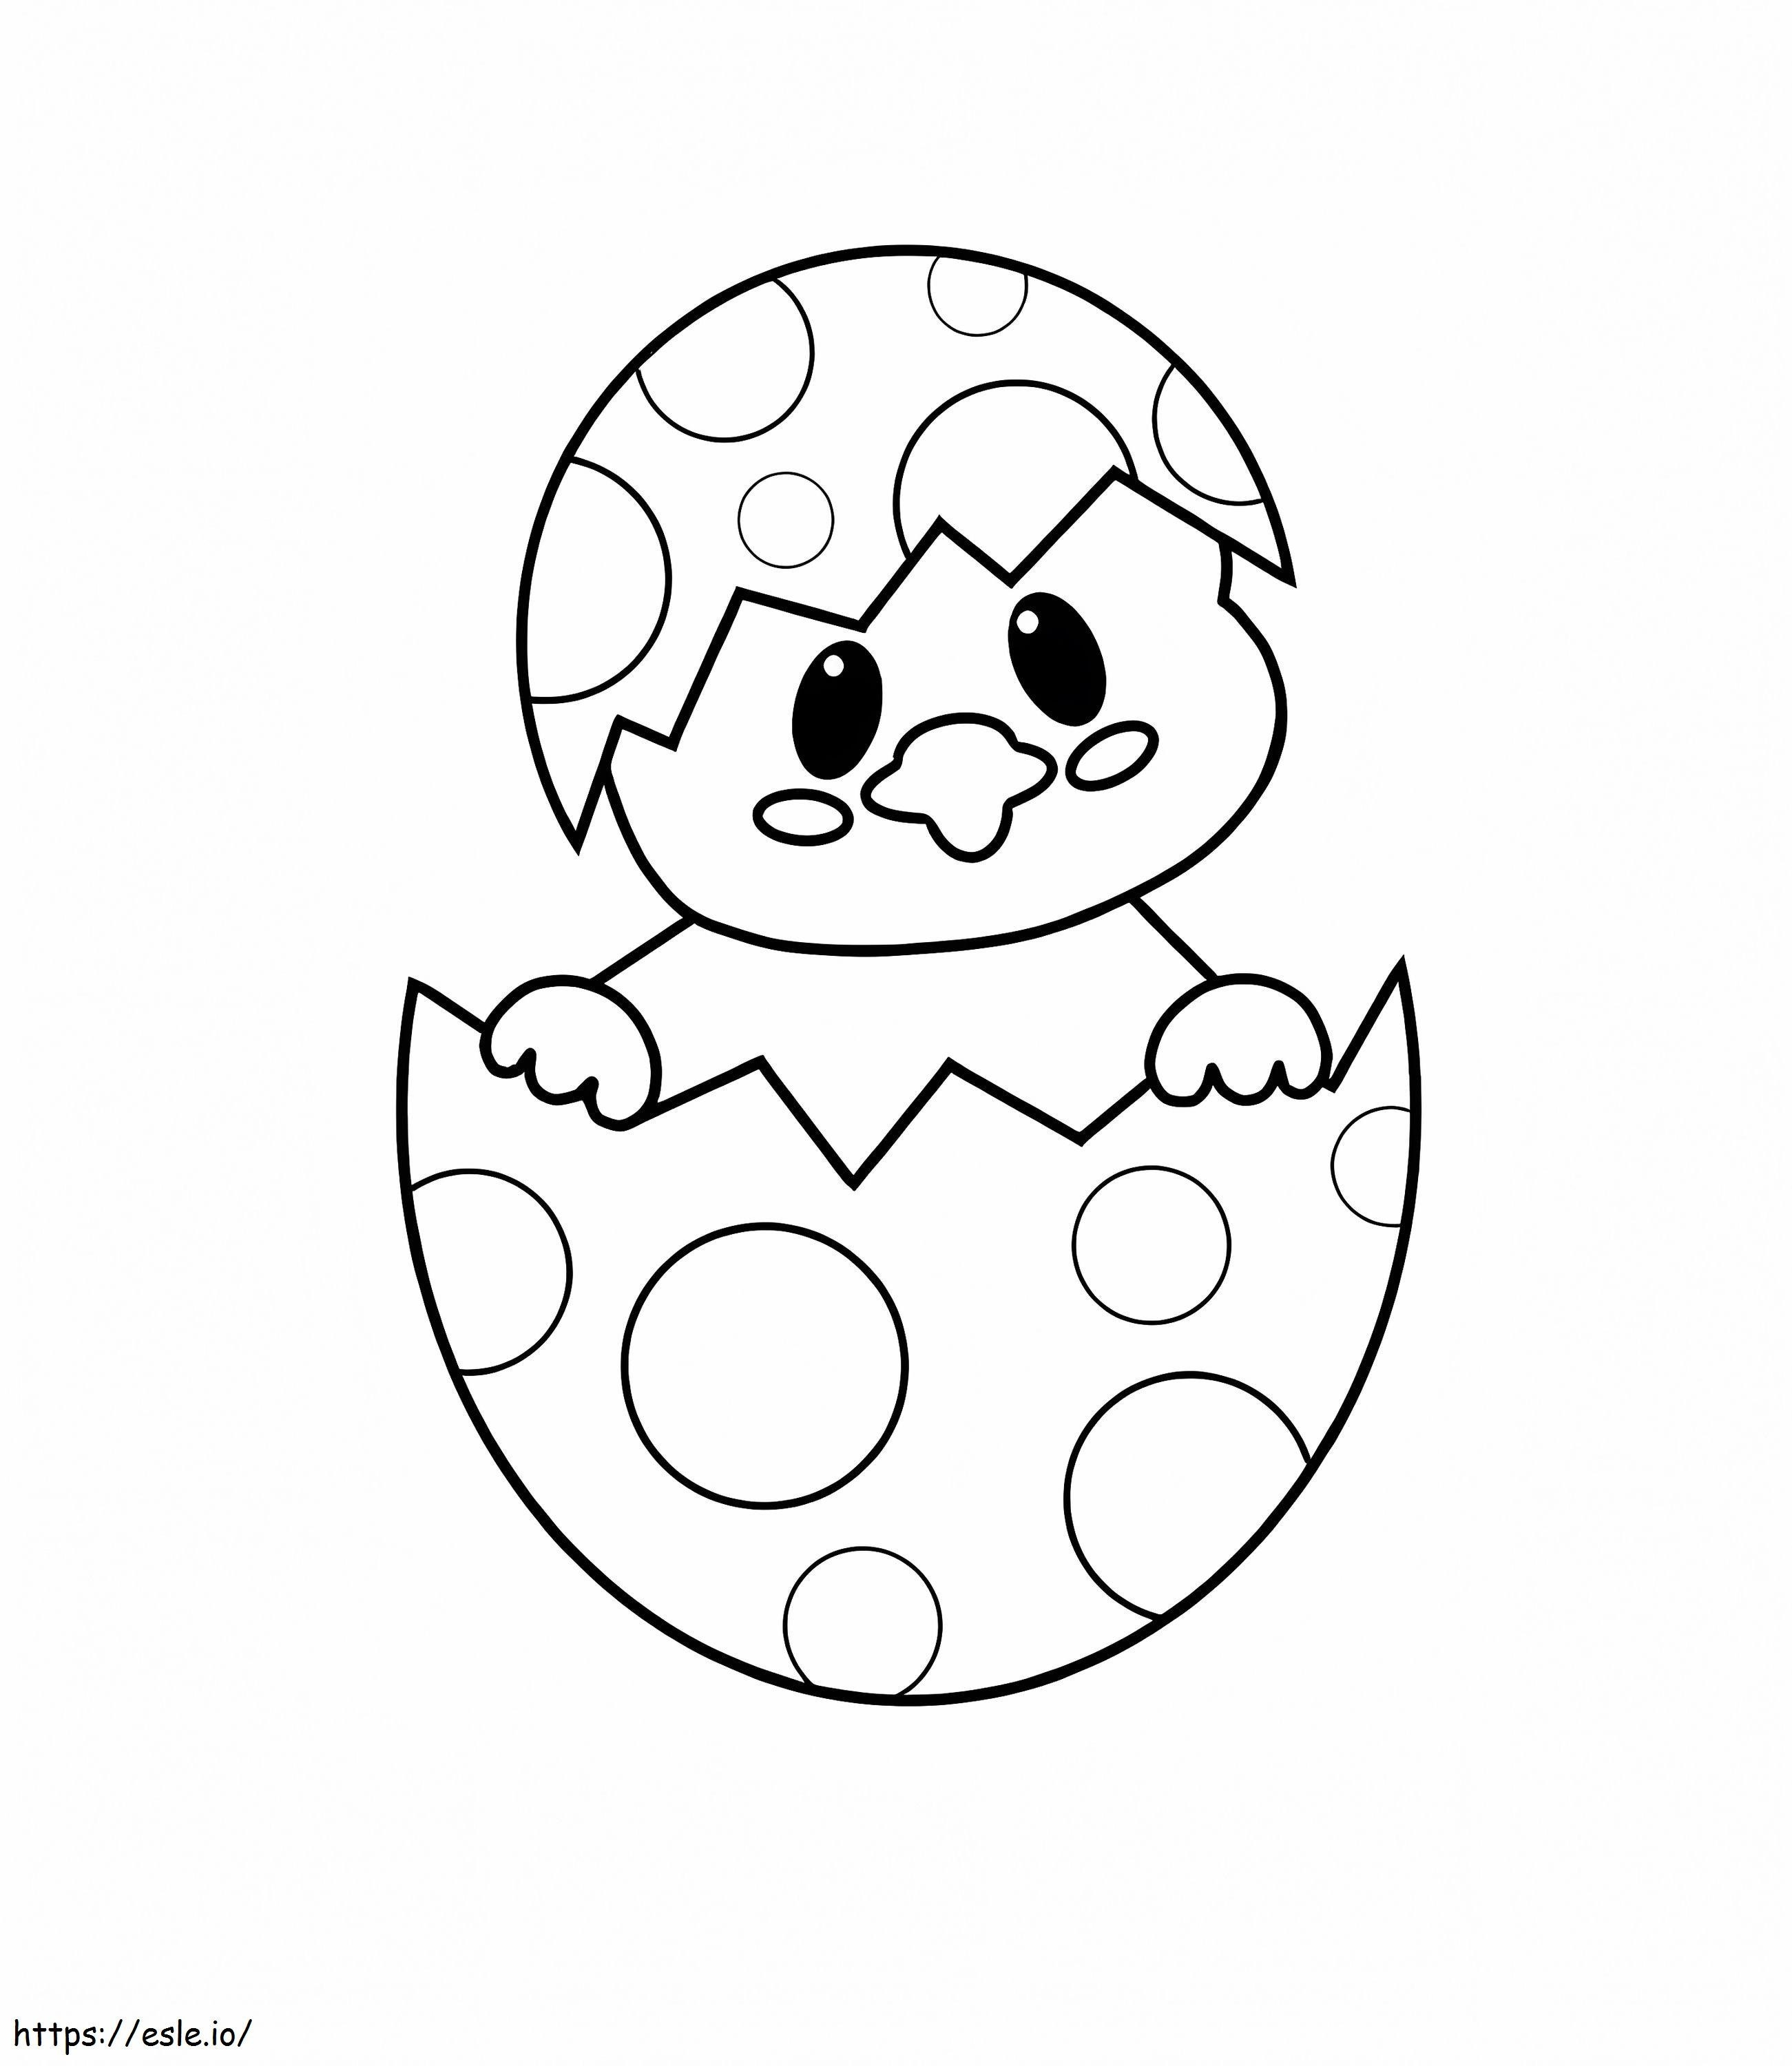 Easter Duck coloring page